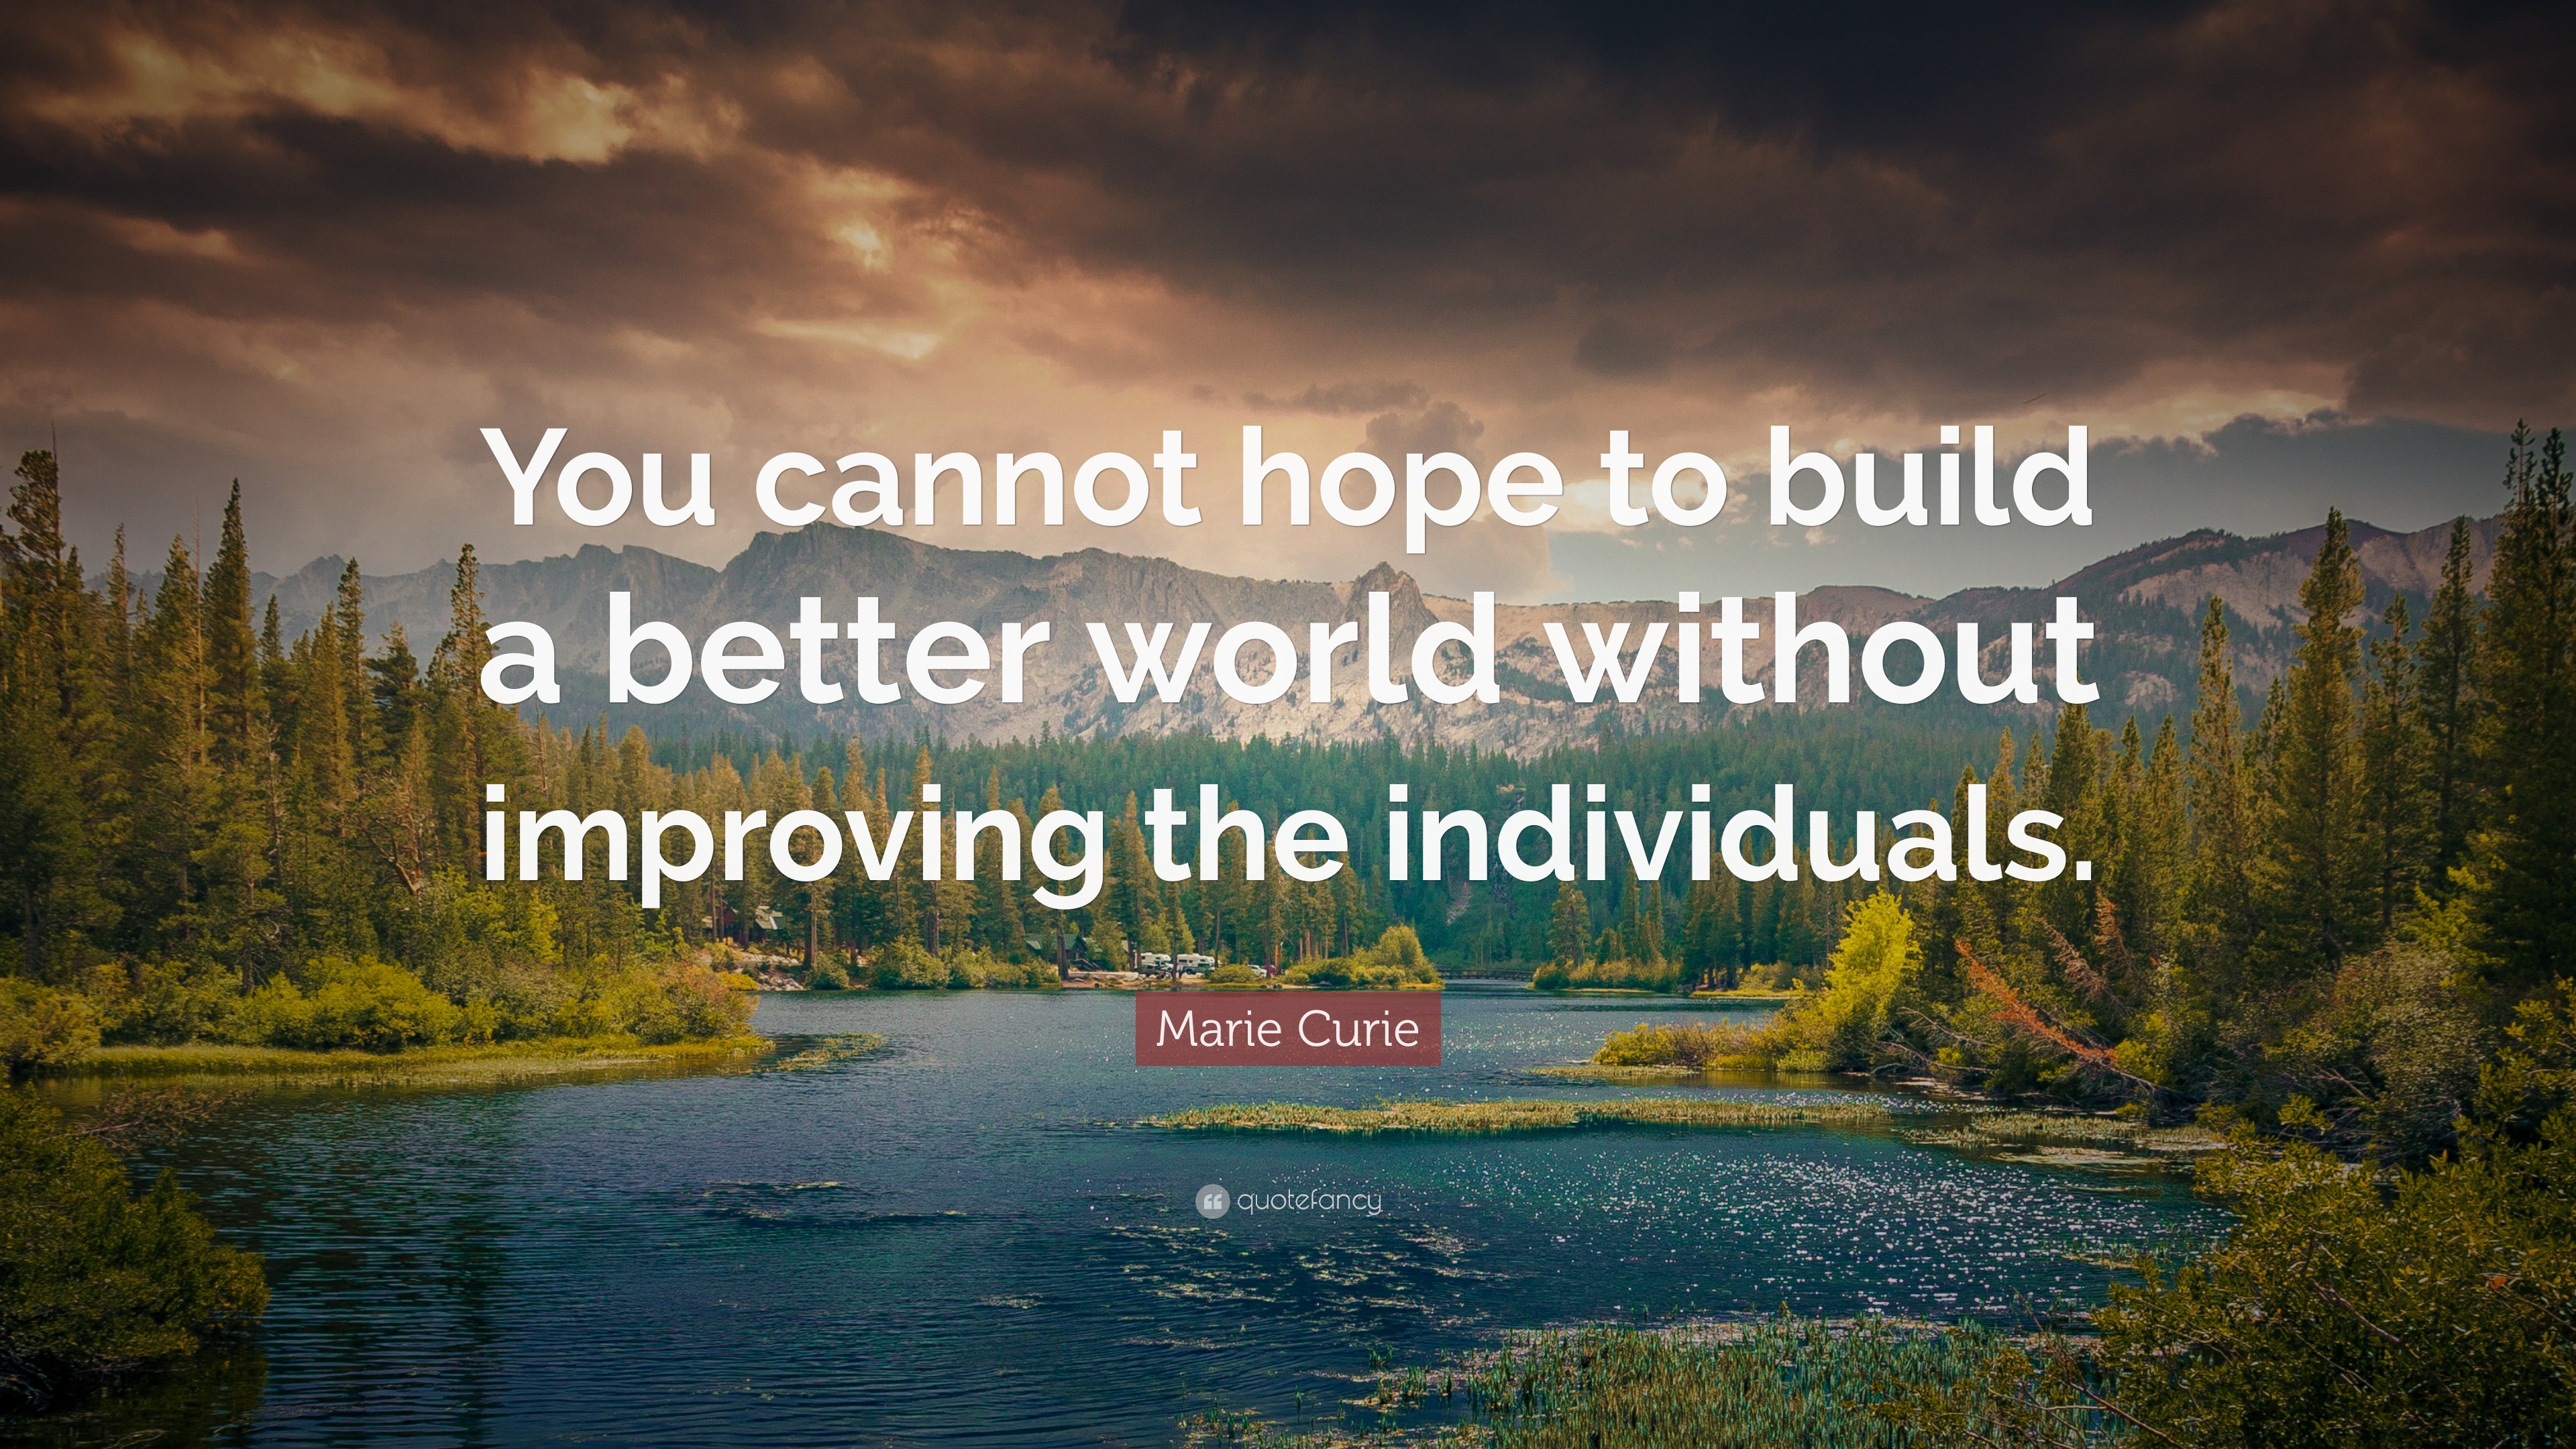 Marie Curie Quote: "You cannot hope to build a better world without improving the individuals ...